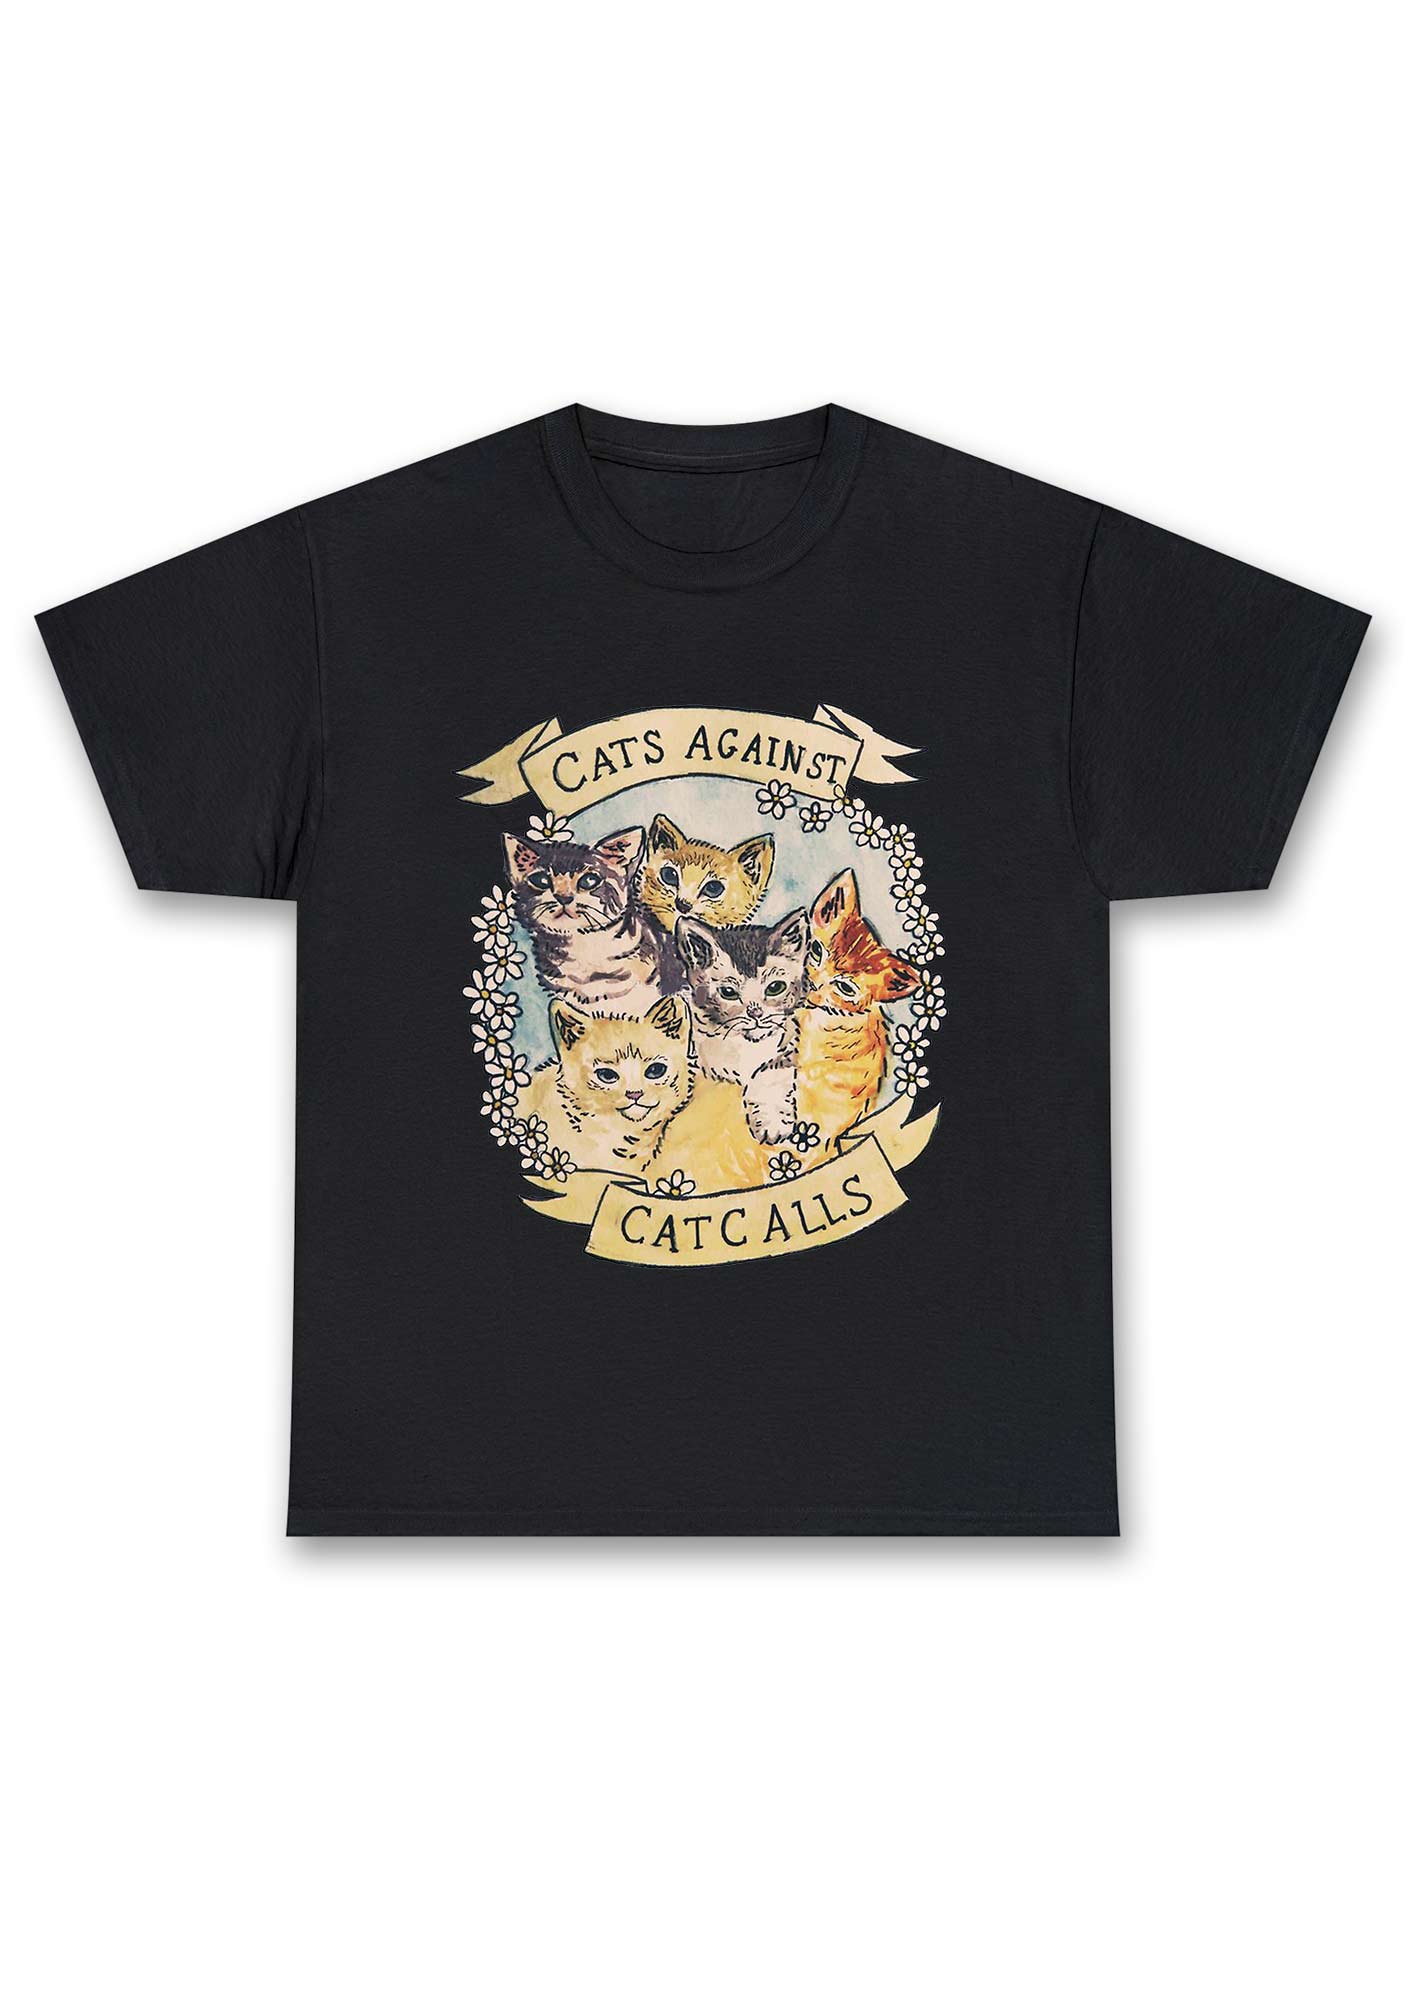 Cats Against Cat Calls Chunky Shirt